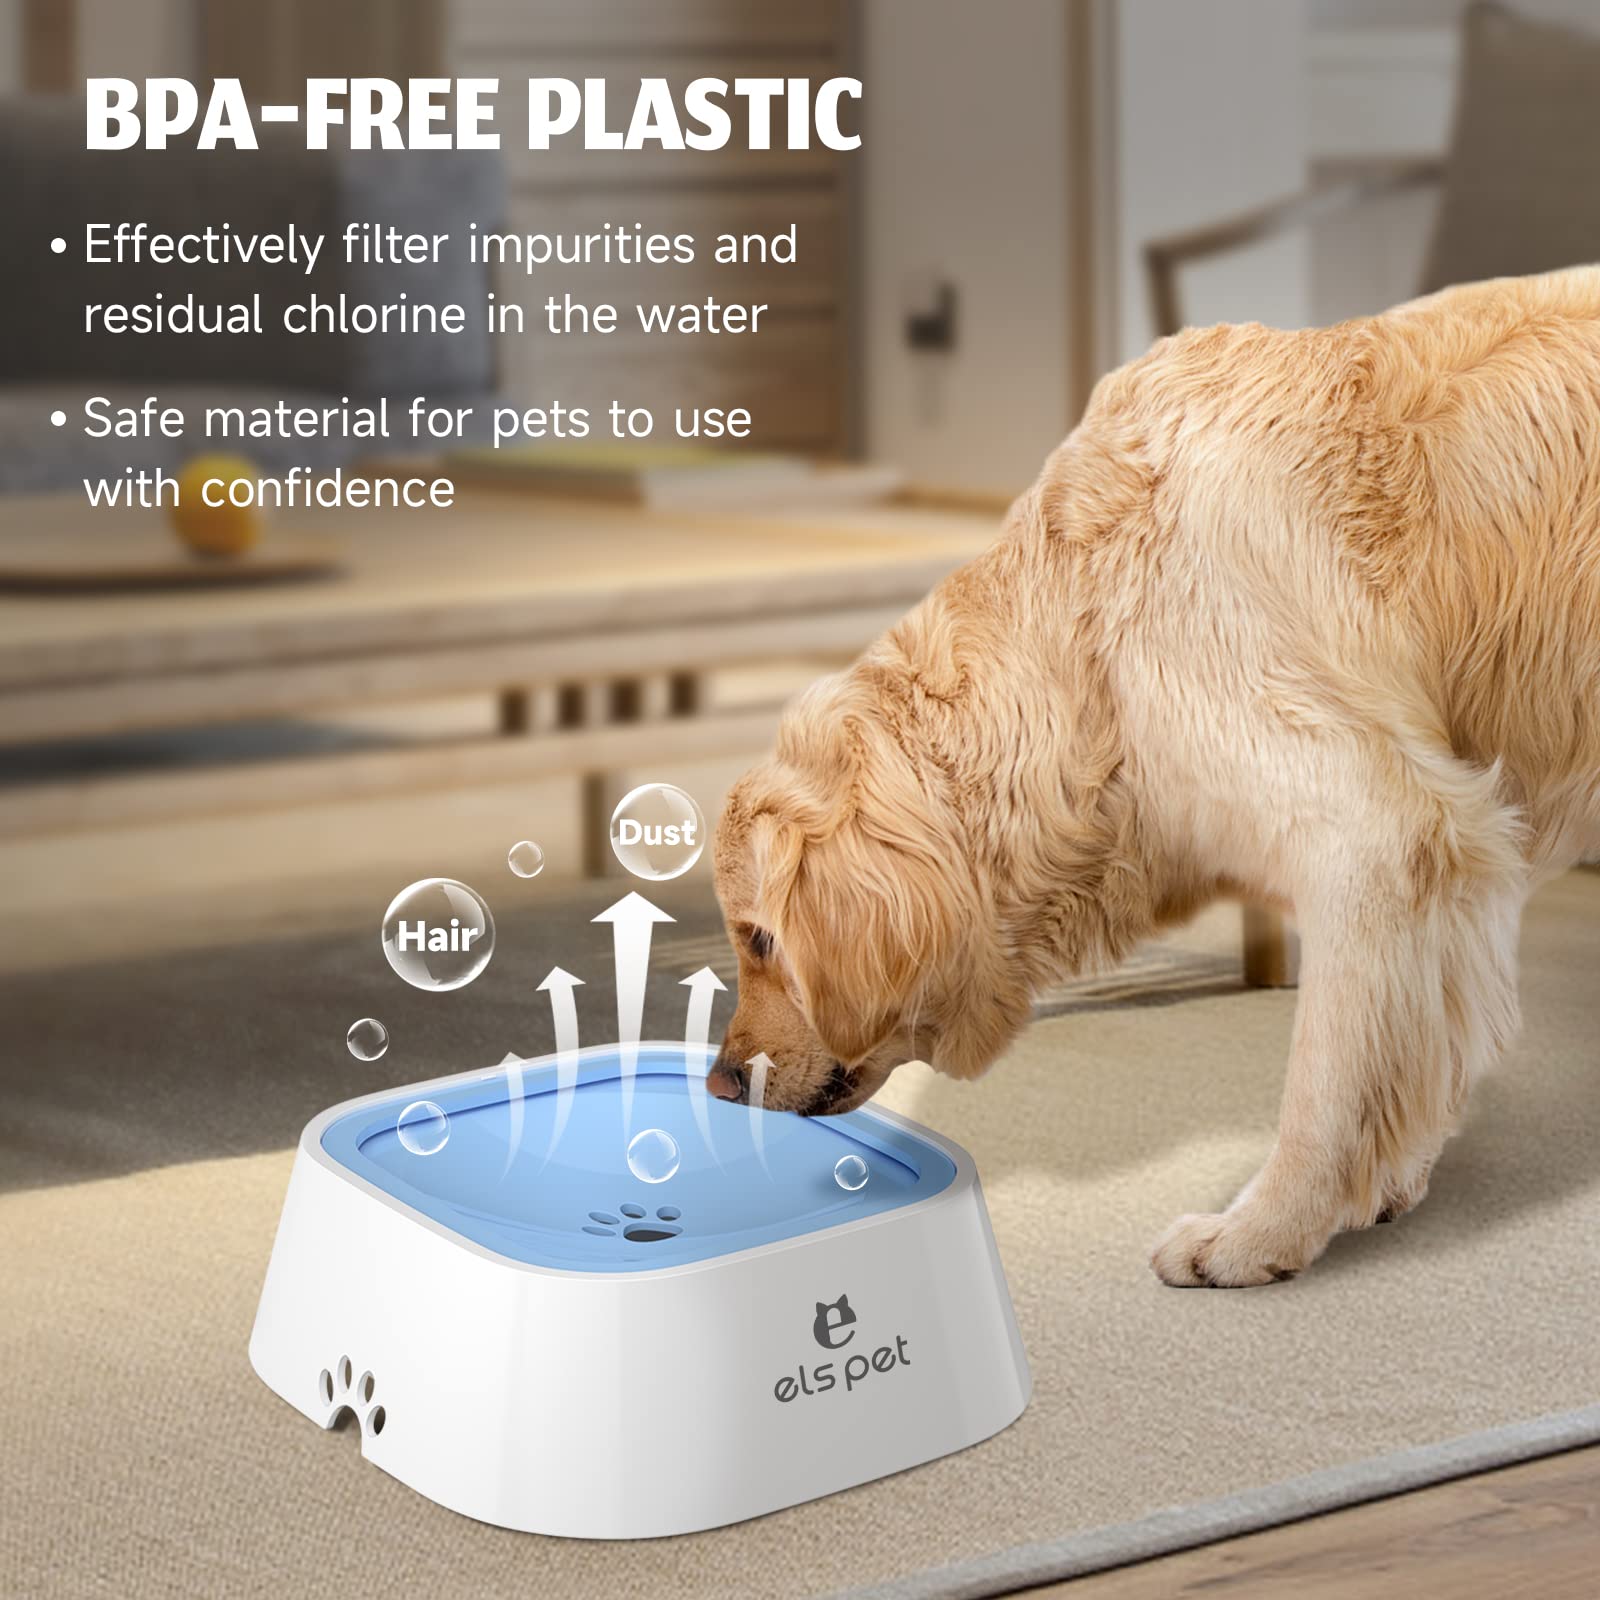 2L/1L Water Bowl, Large Capacity Anti-Spill Dog Bowl Made of Eco-Friendly Material, Slow Feeder/Drinker Car Travel Suitable for Cats and Pets